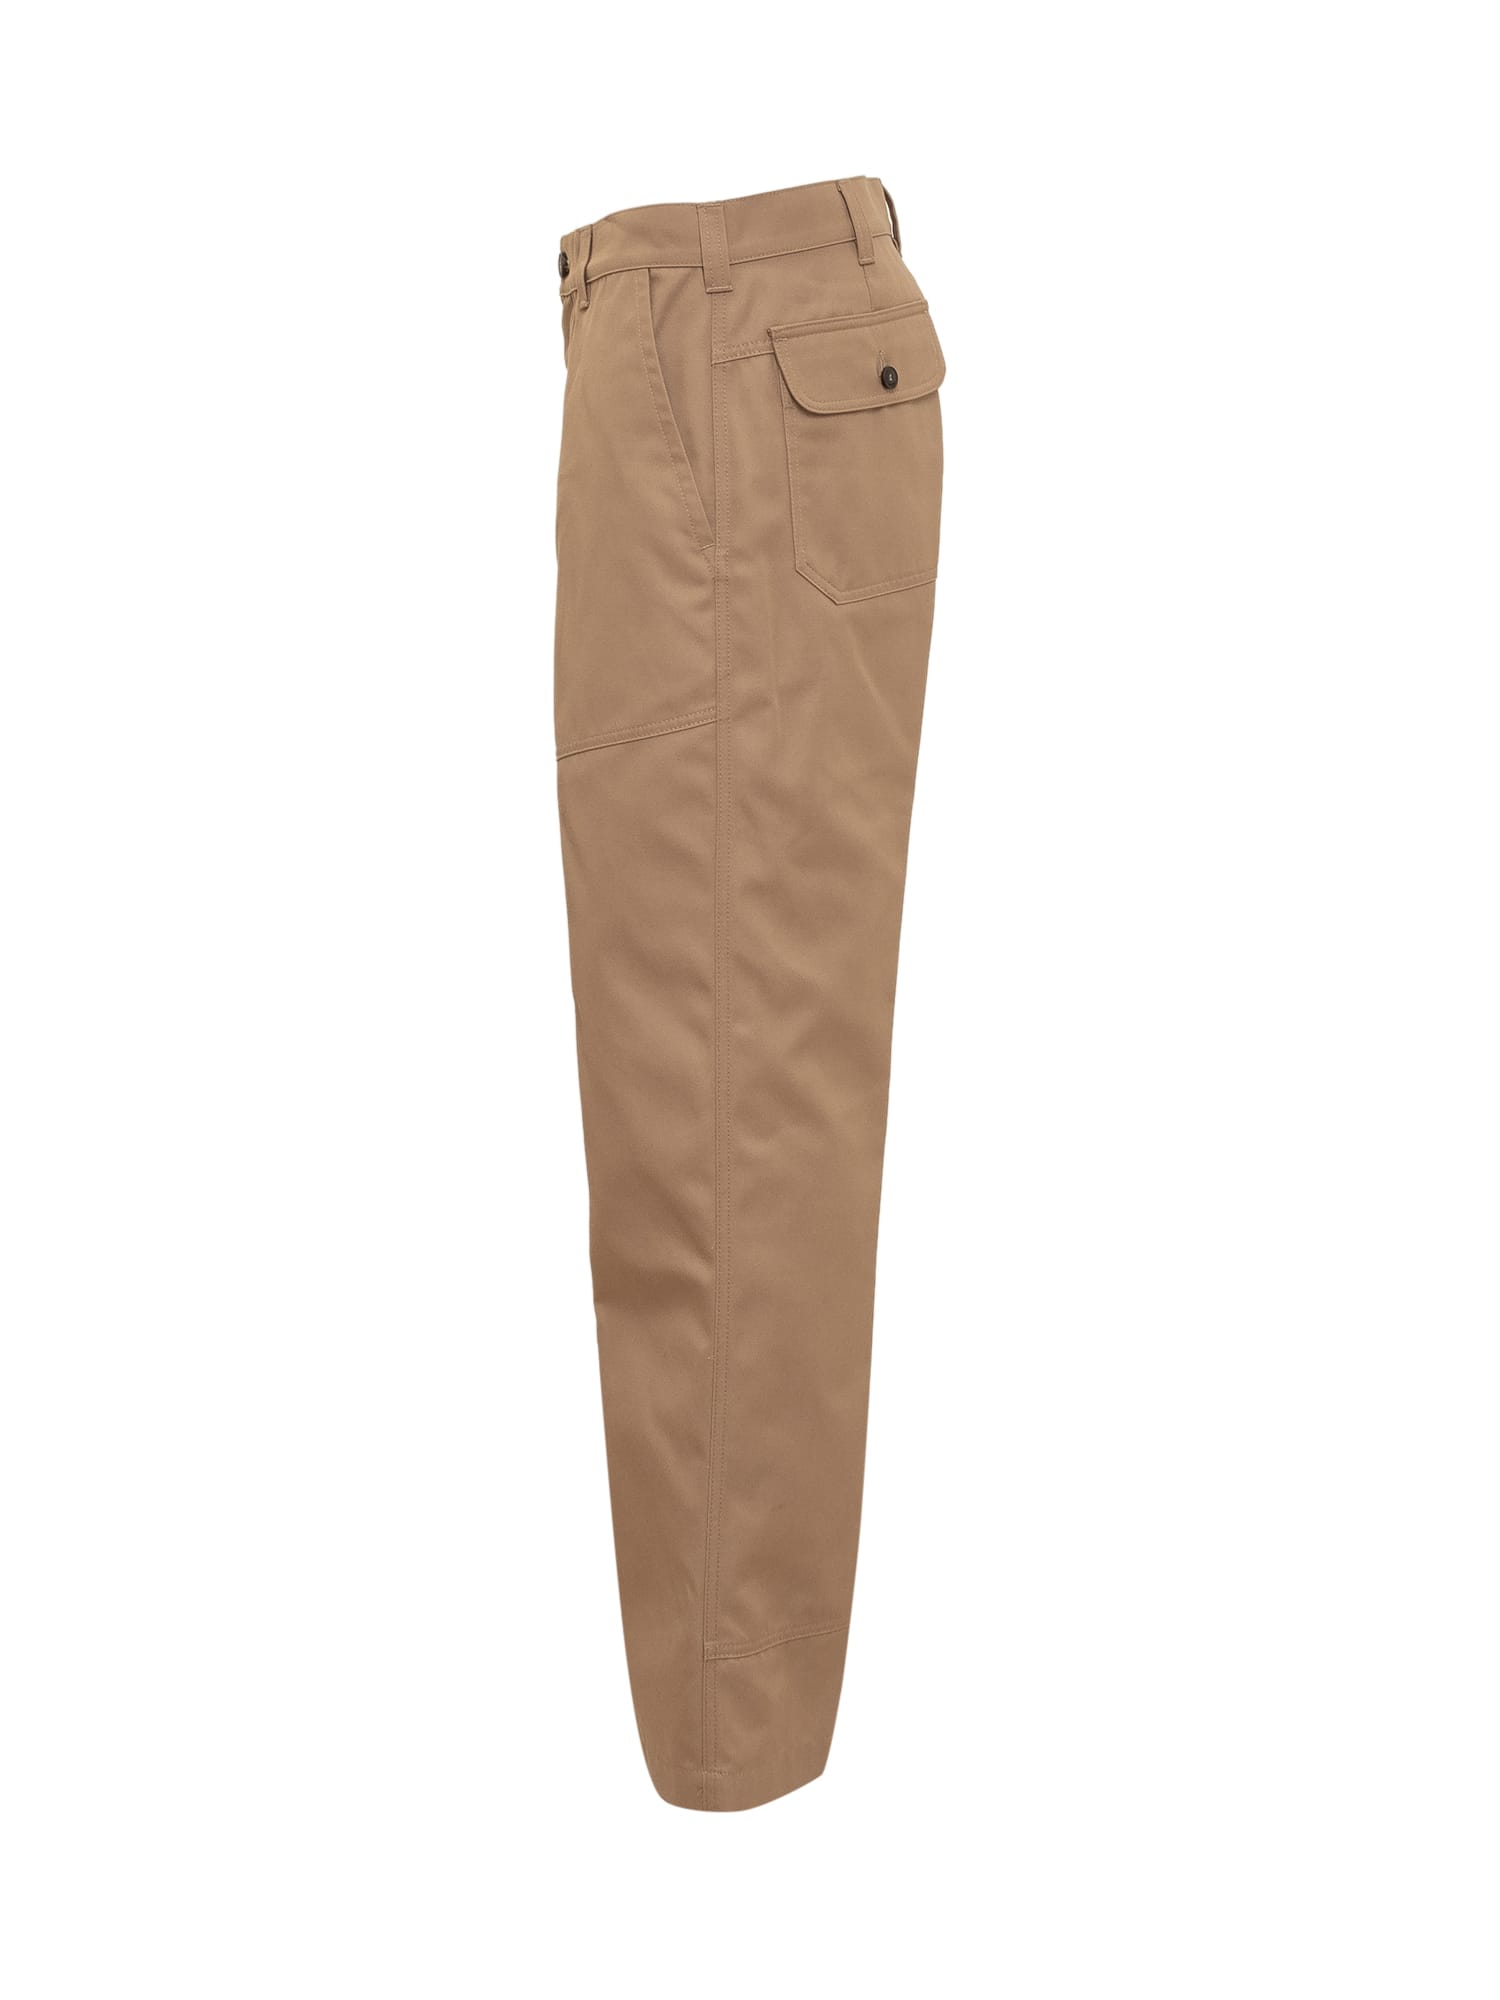 Shop The Seafarer Prospect Trousers In 8030